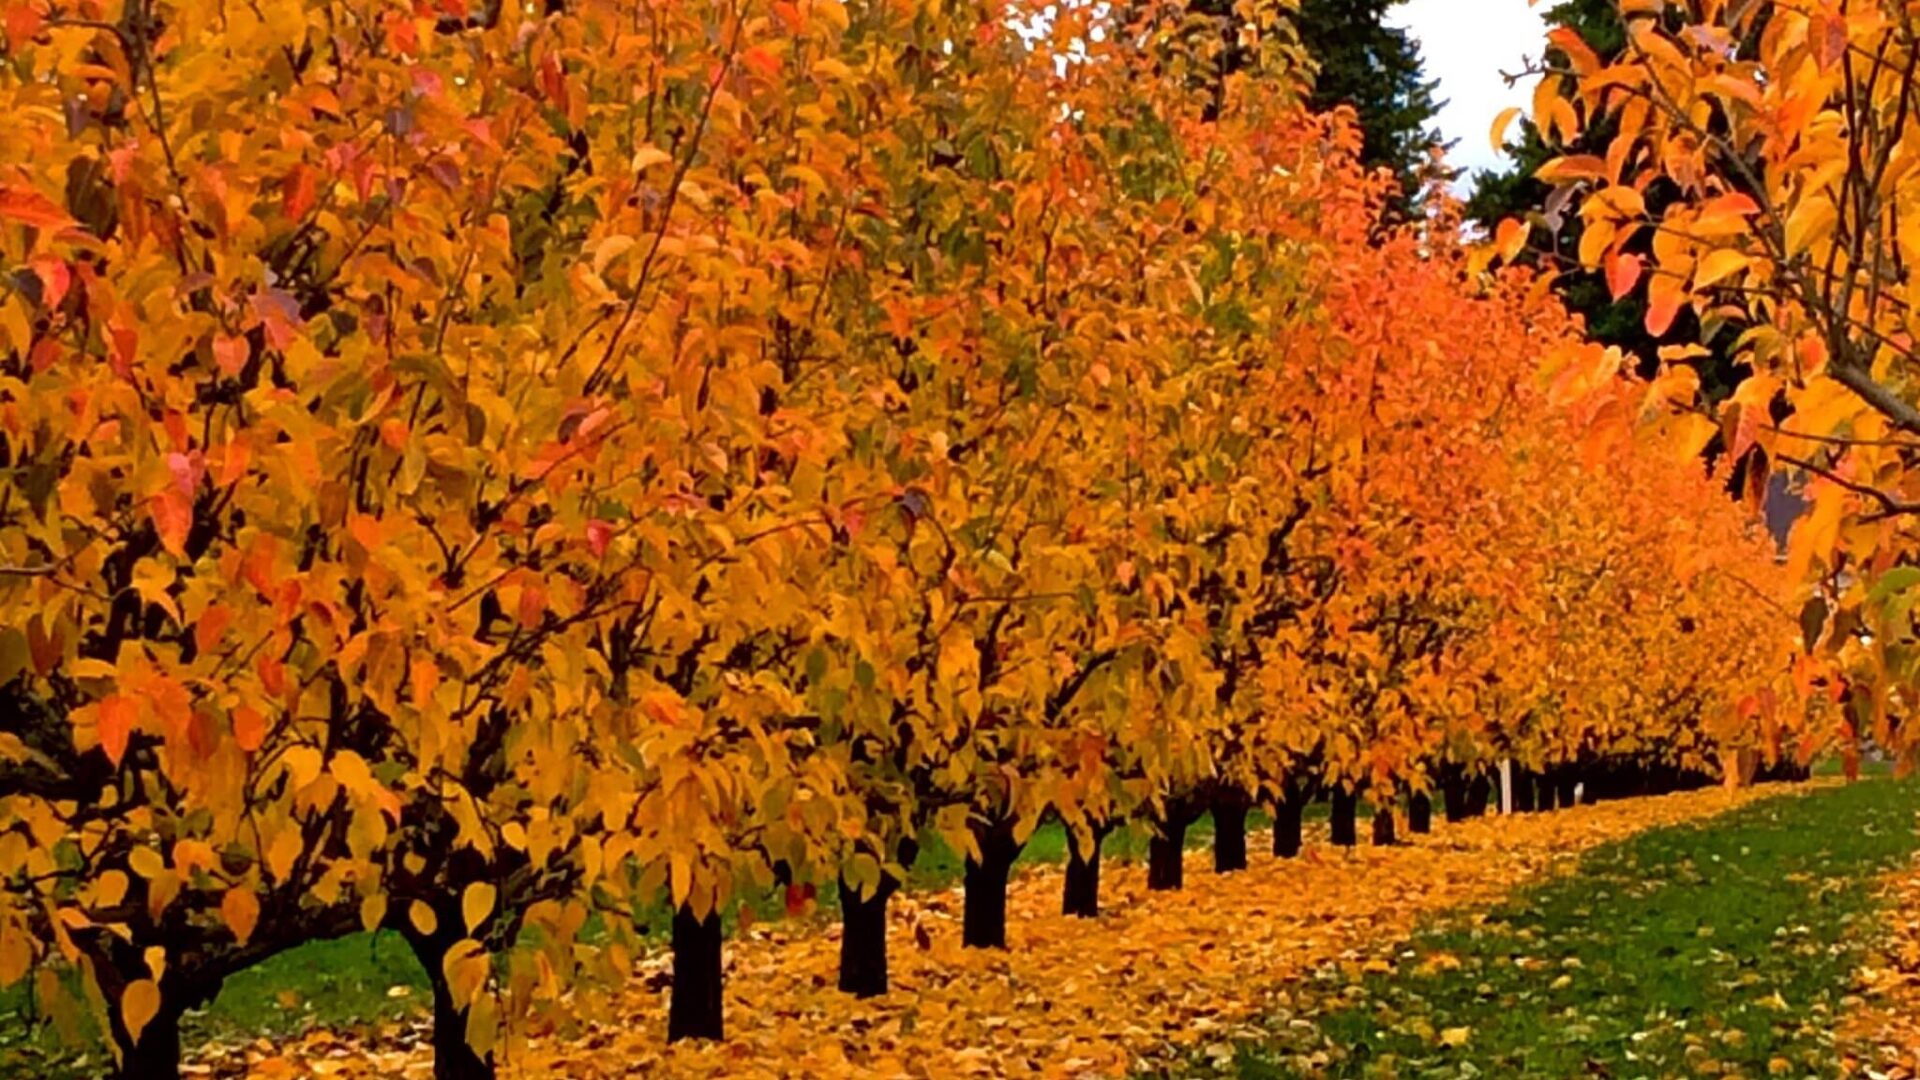 Vibrant orange Pear trees in the hood River Valley